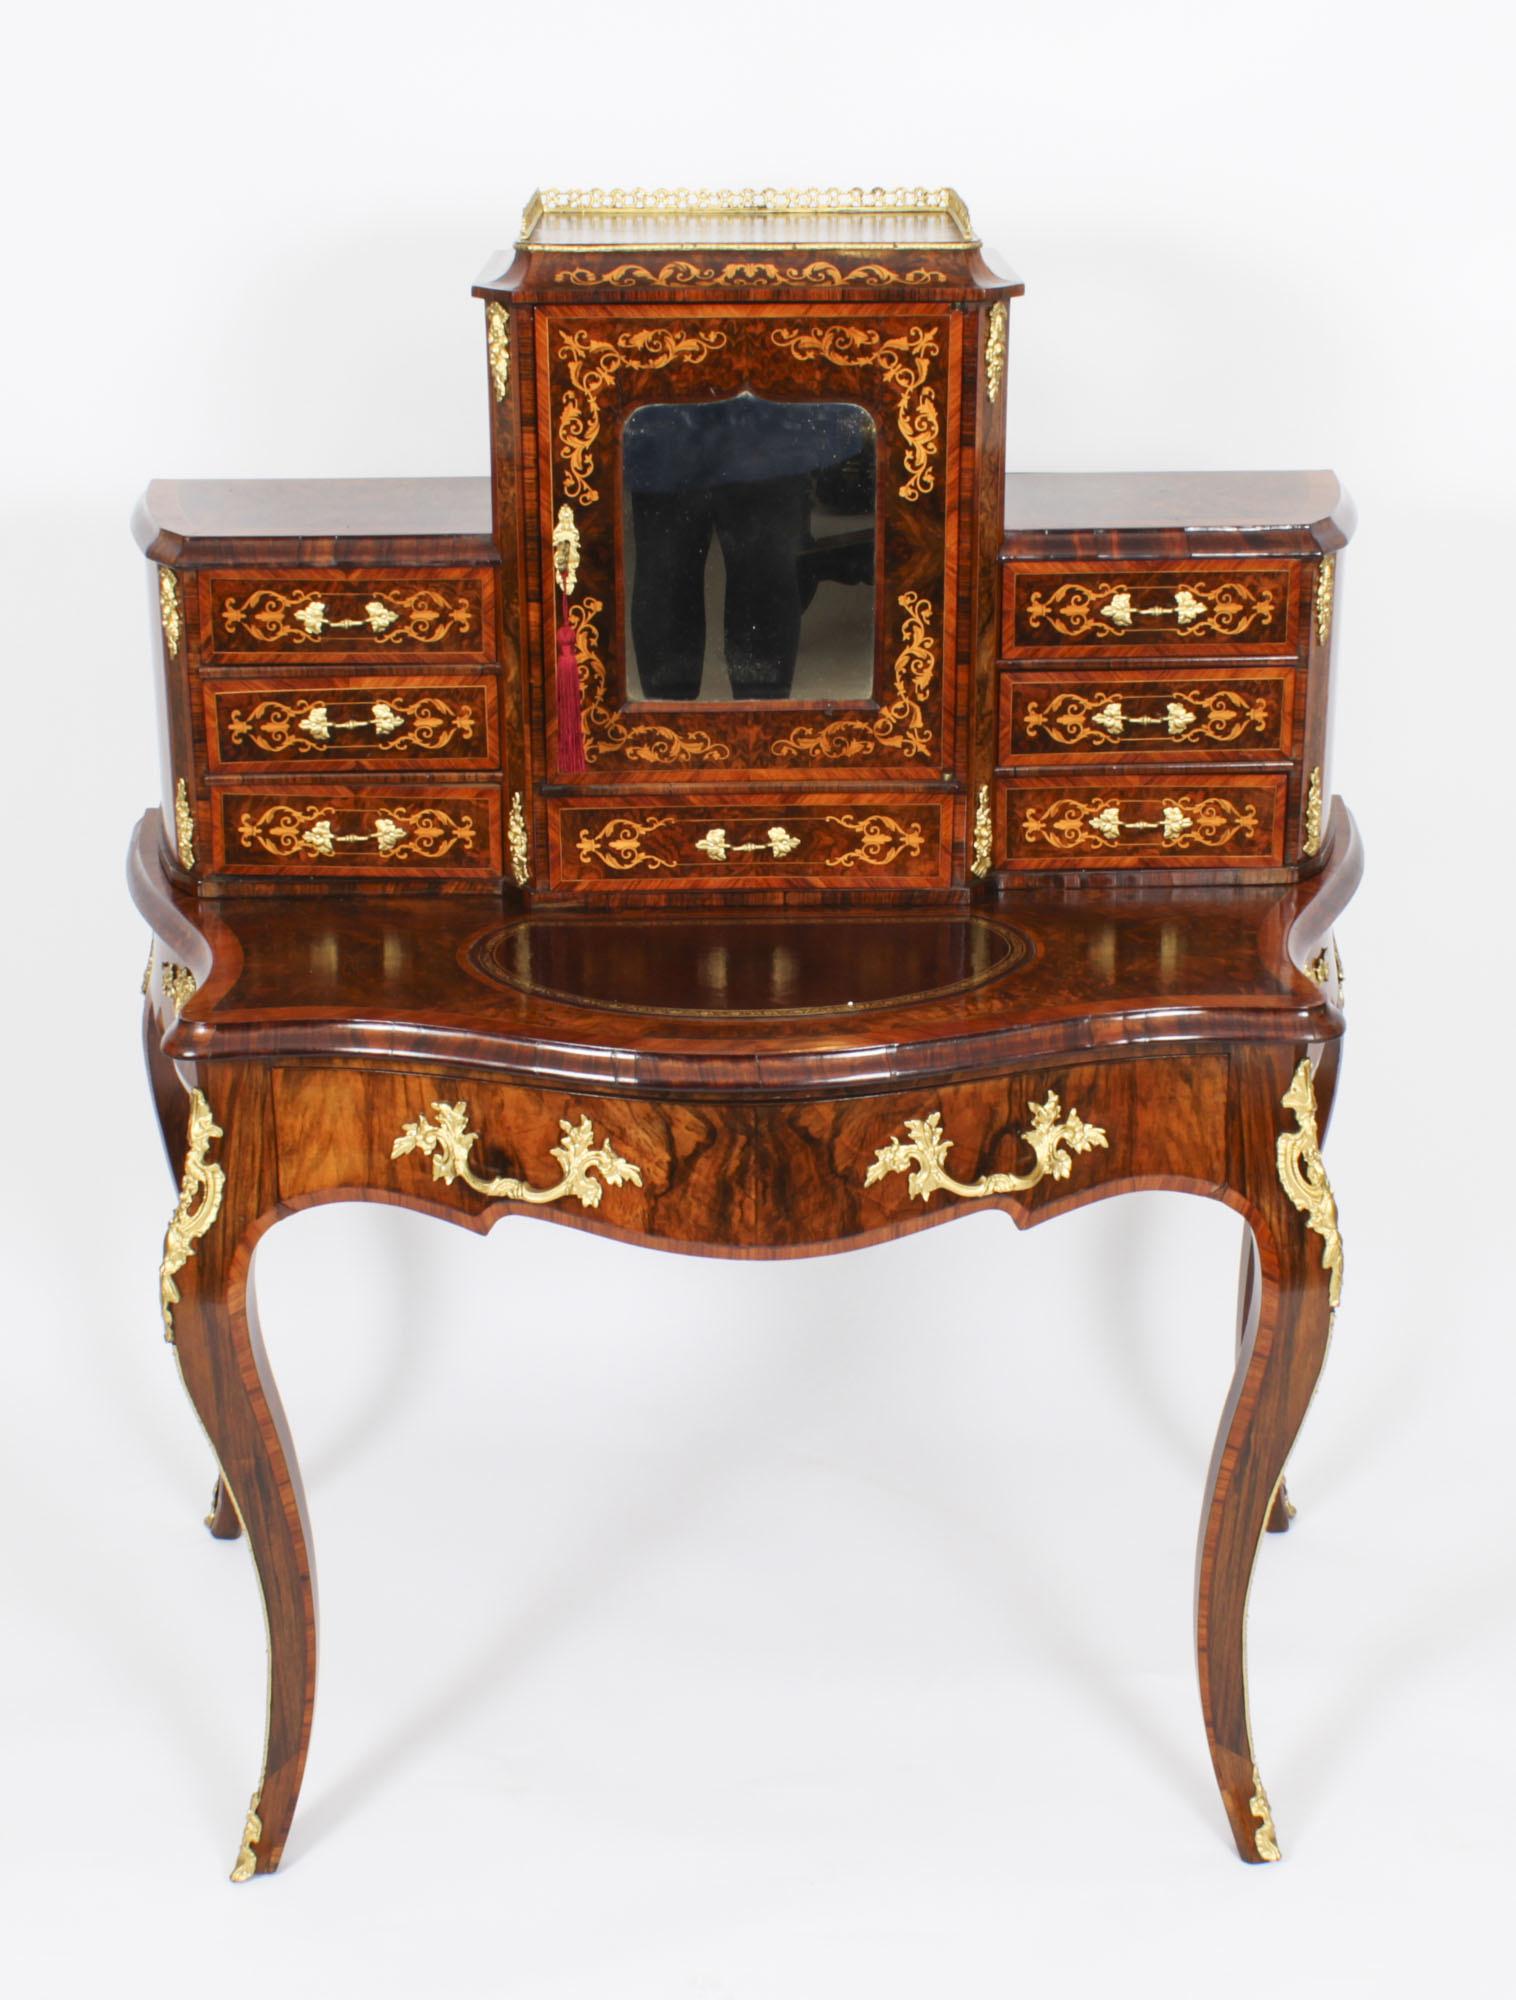 This is a elegant Victorian burr walnut and marquetry Bonheur Du Jour, or Ladies writing desk, circa 1860 in date. 
 
The superstructure comprises a large central bay with a mirror inset door and a three quarter brass gallery above. The door opens